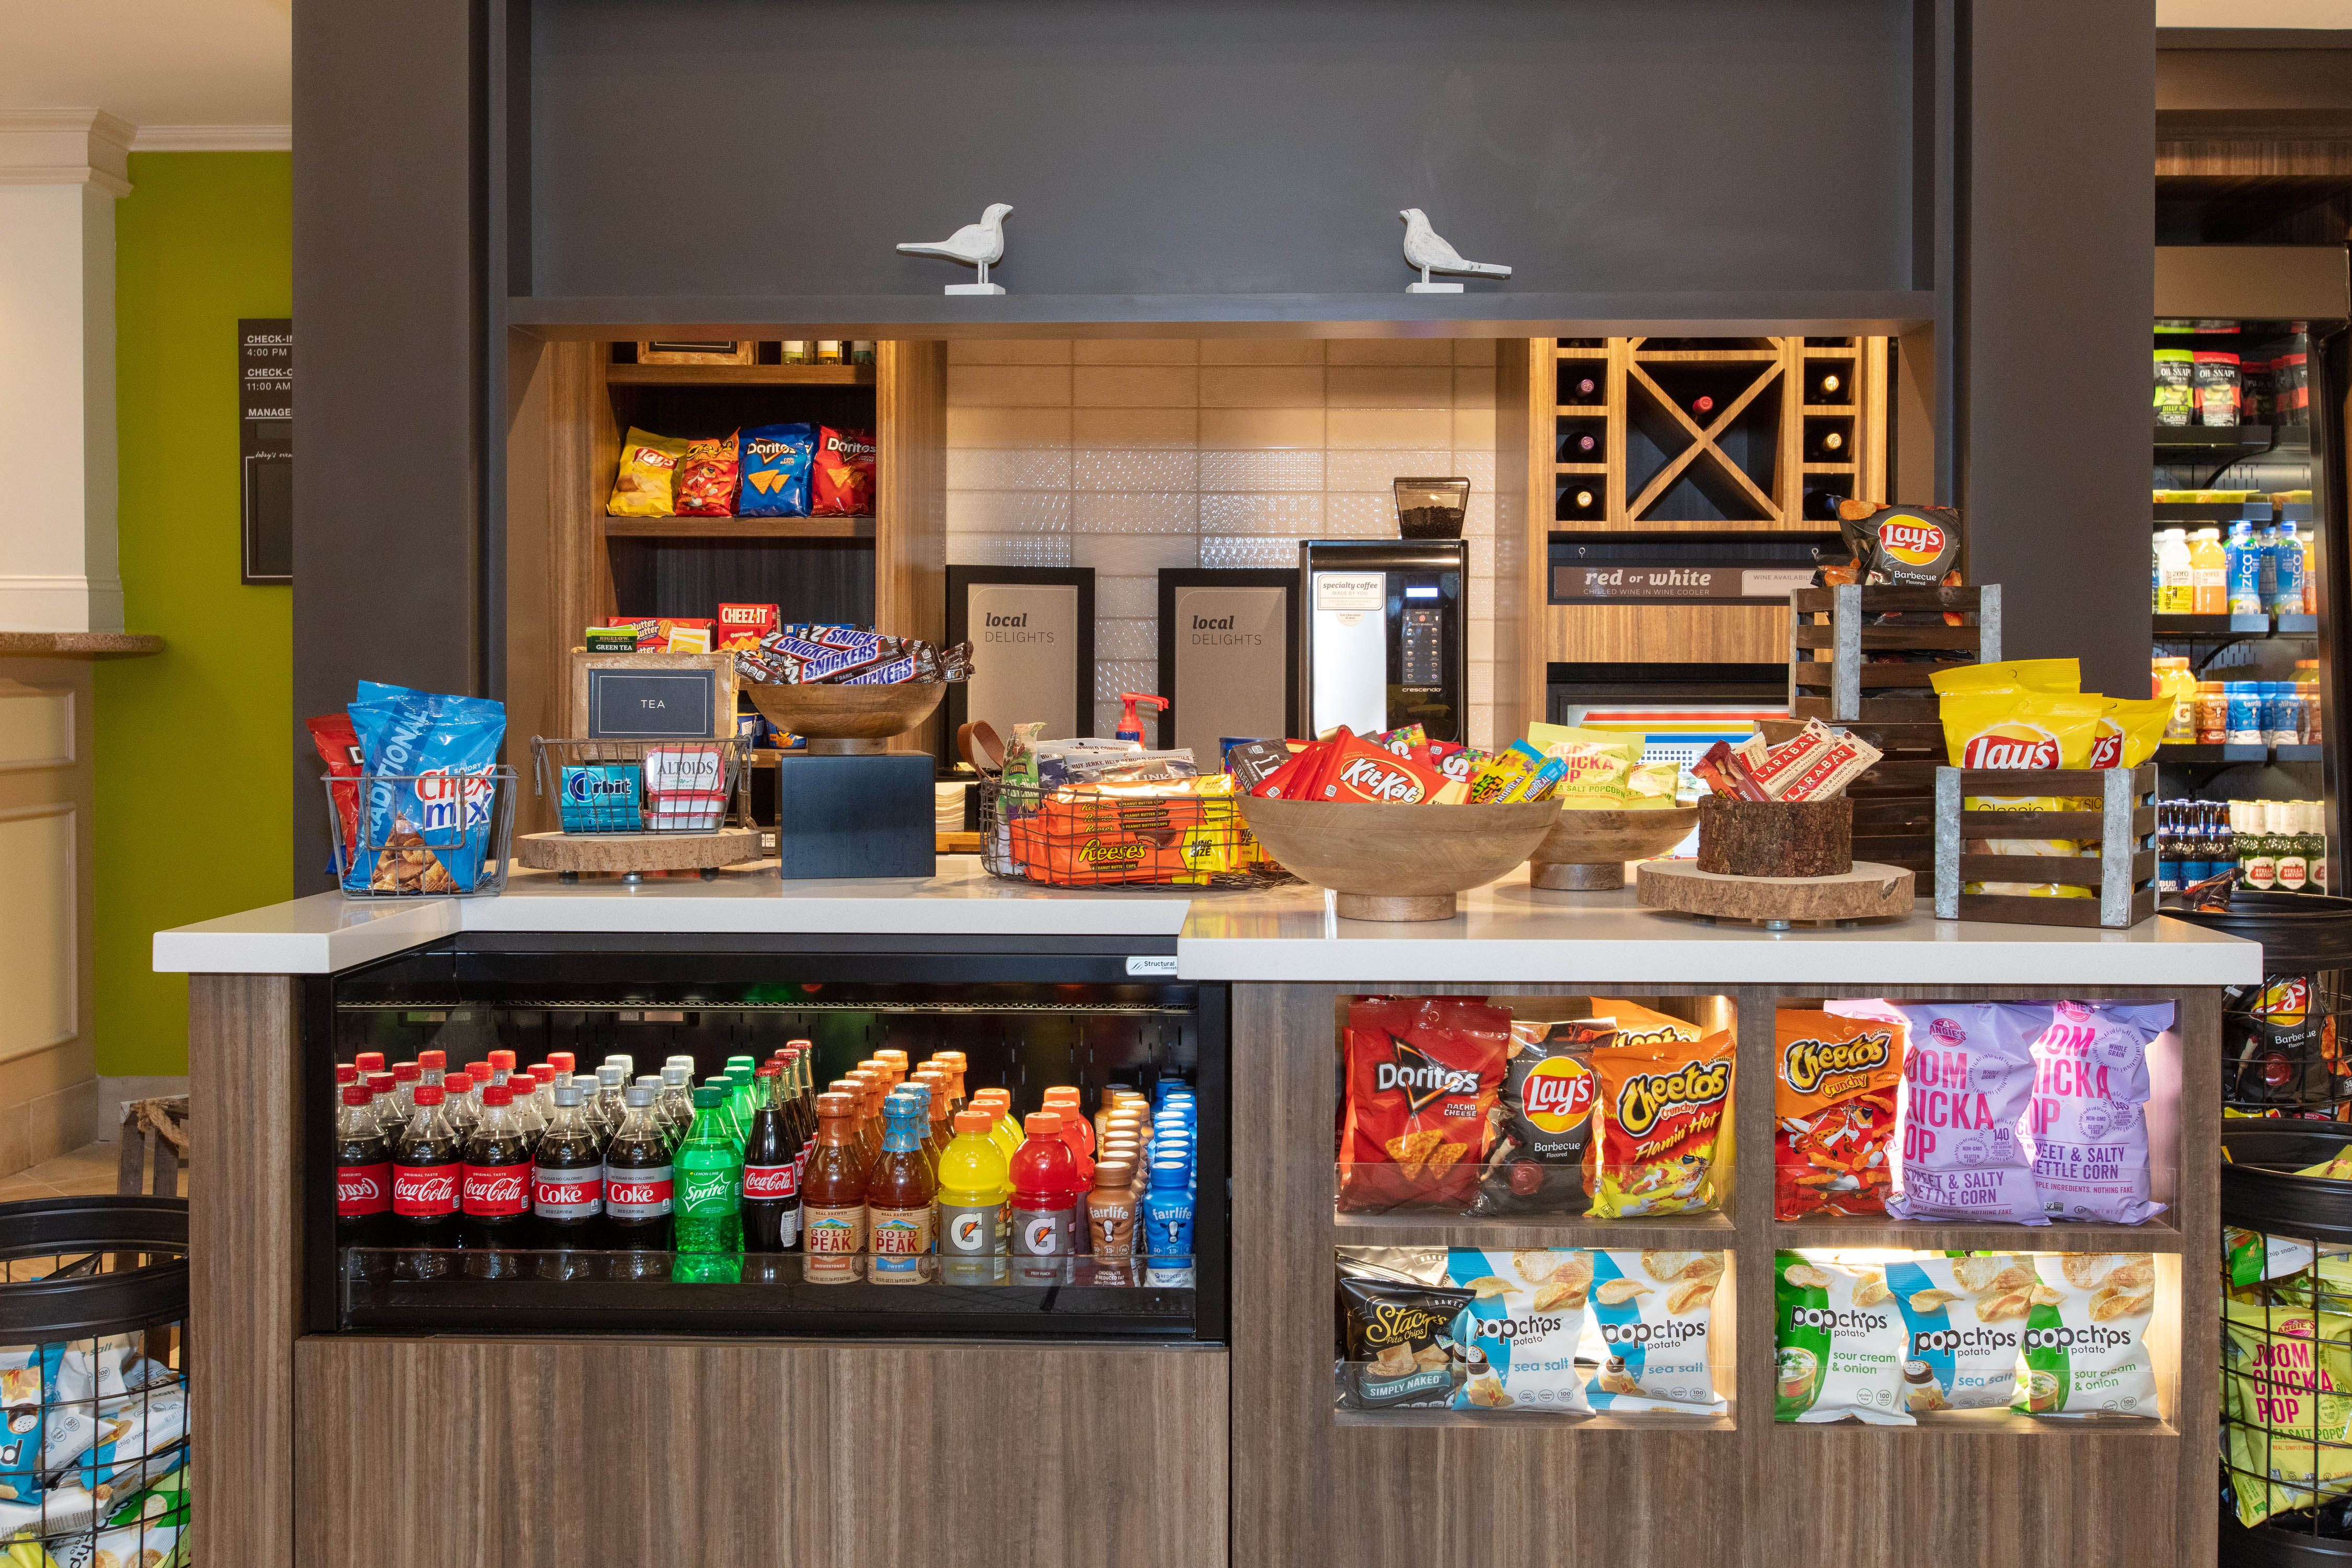 Snack Shop View with stocked items